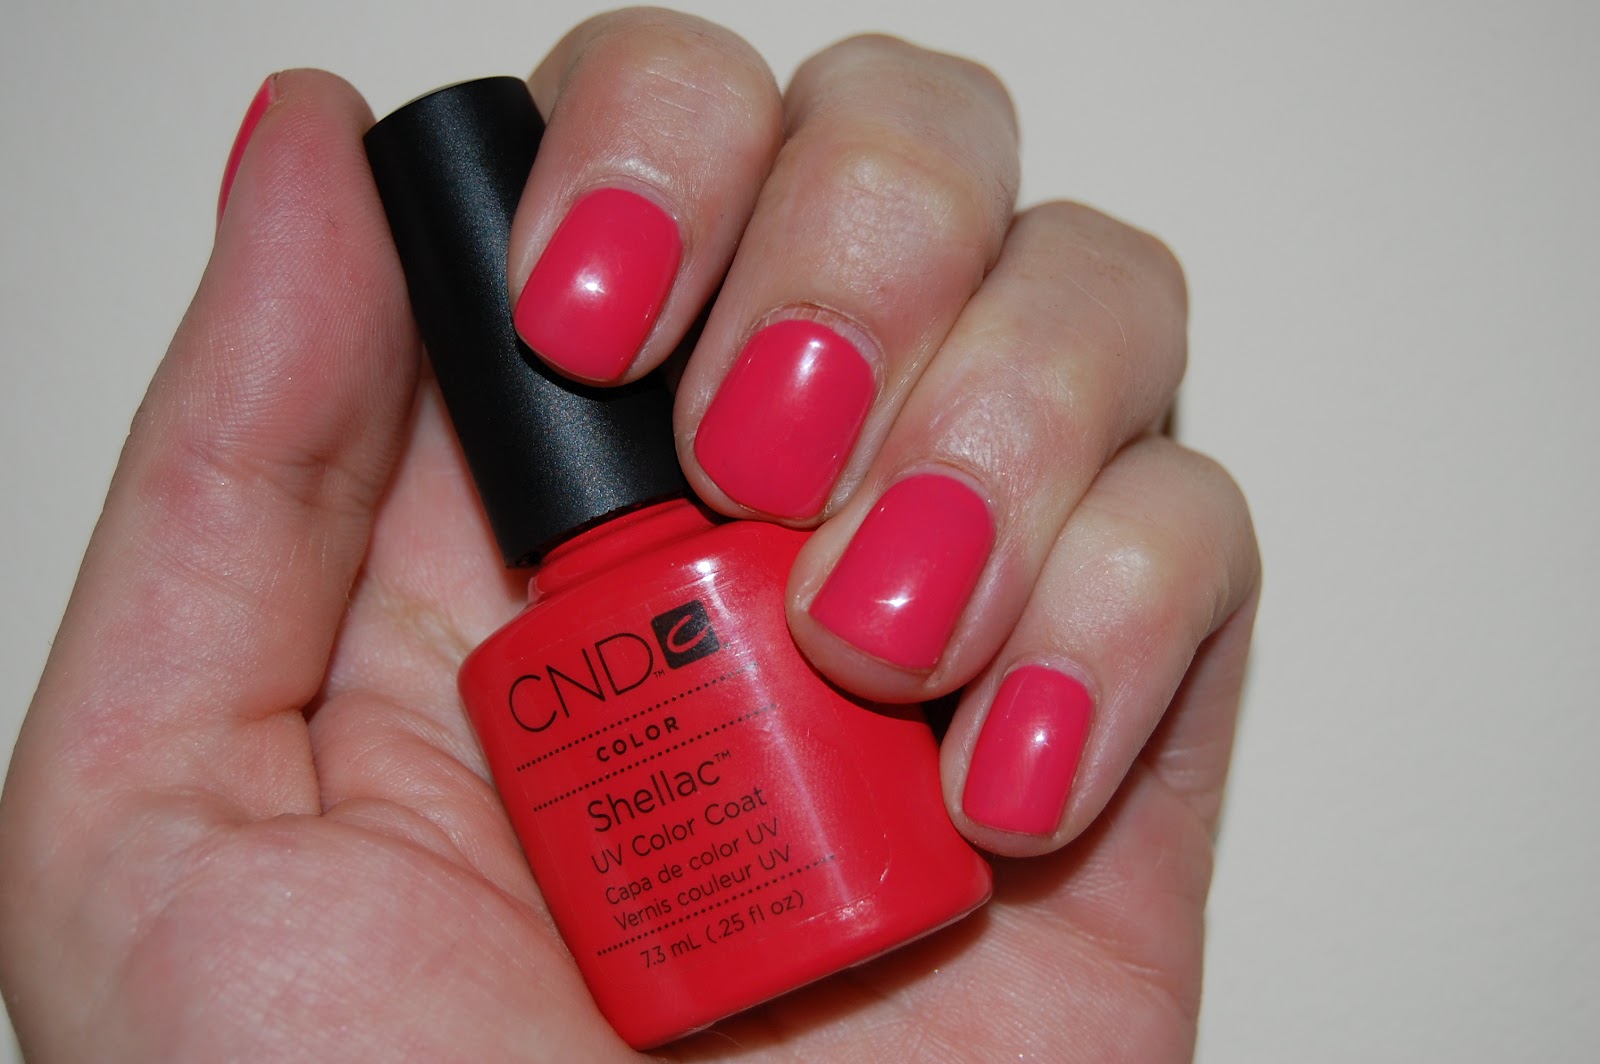 10. "CND Shellac in "Tropix" for a bold and tropical spring color - wide 1